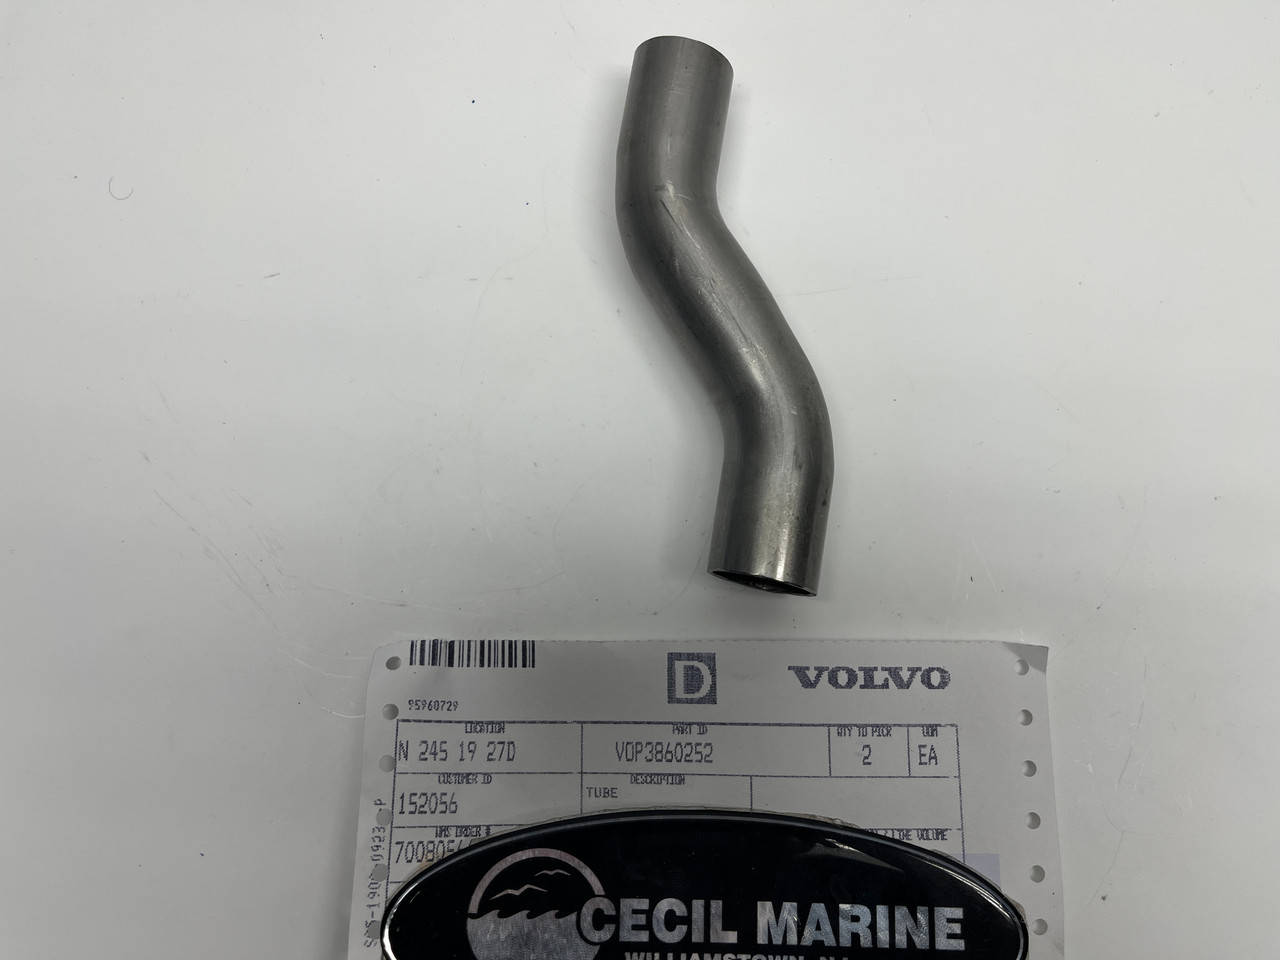 $89.99* GENUINE VOLVO no tax* TUBE 3860252 *In Stock & Ready To Ship!